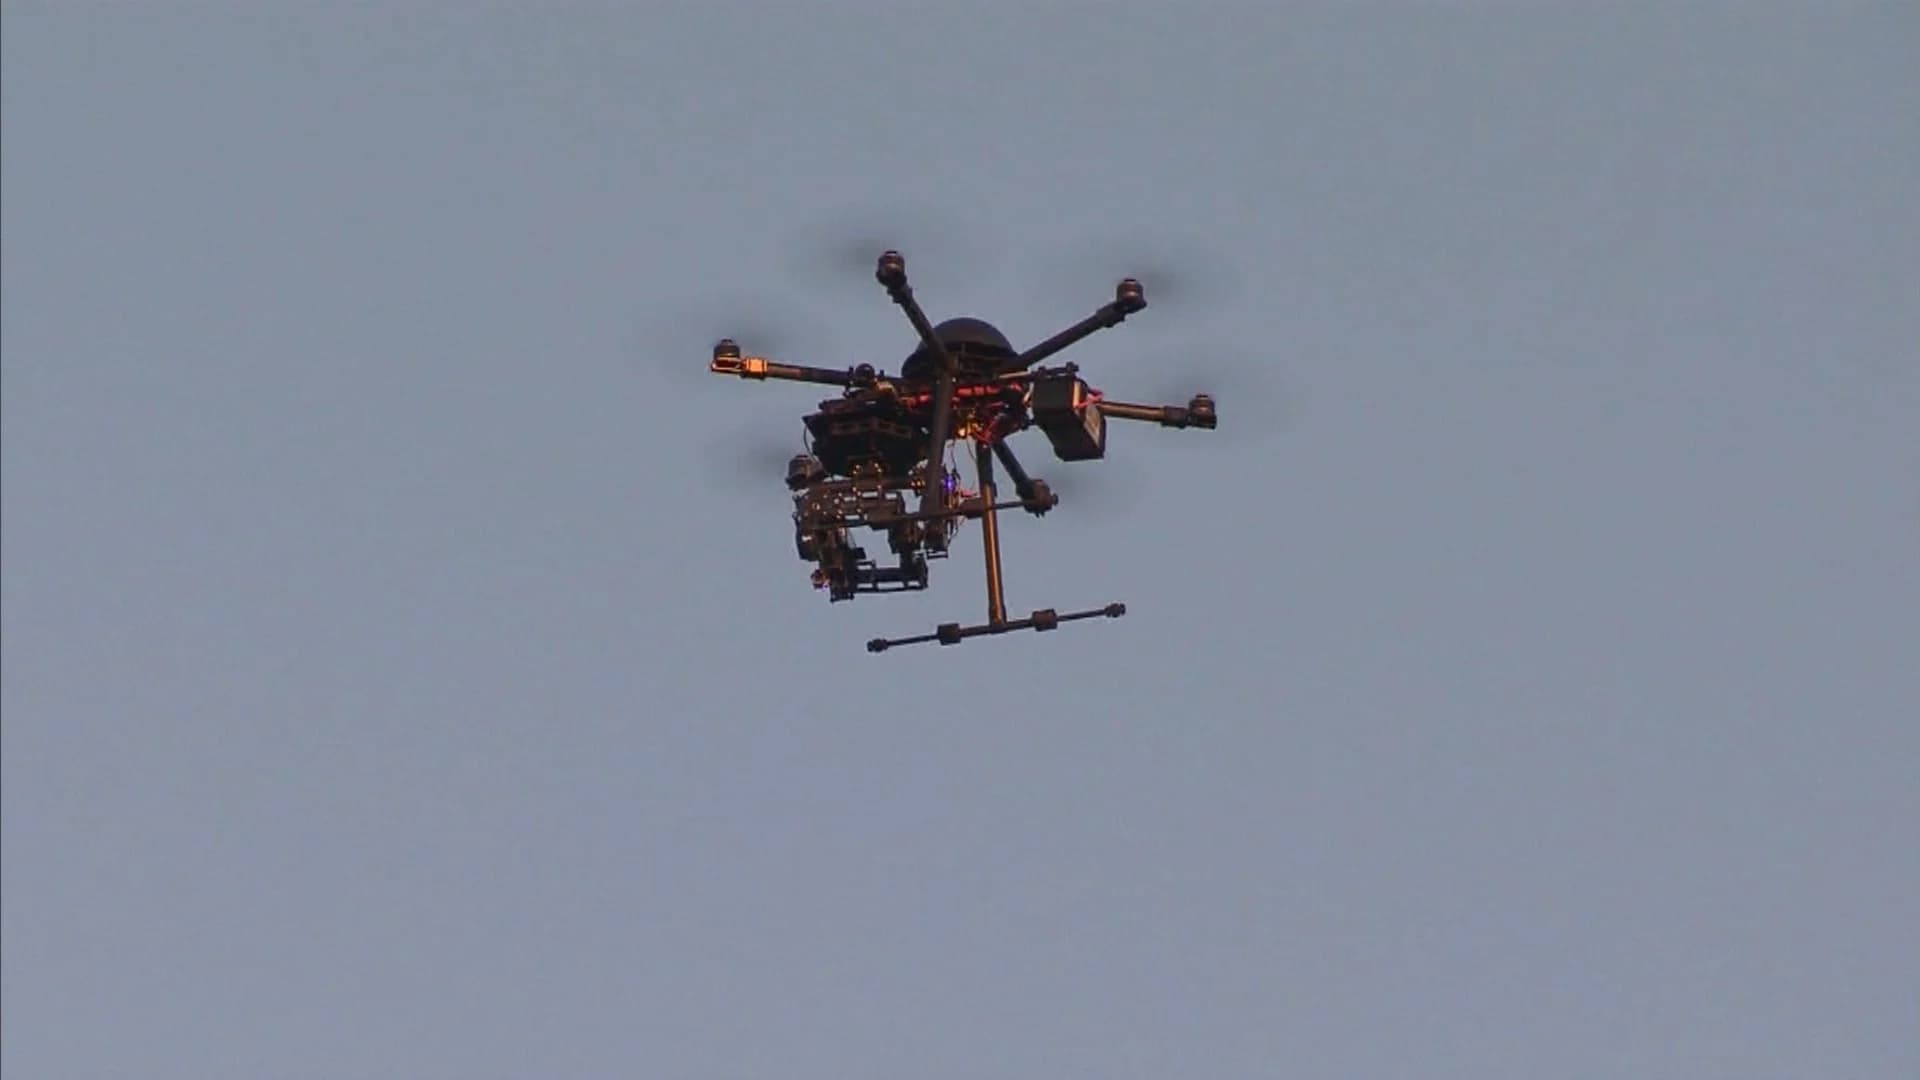 No action taken on Connecticut bill allowing police to weaponize drones